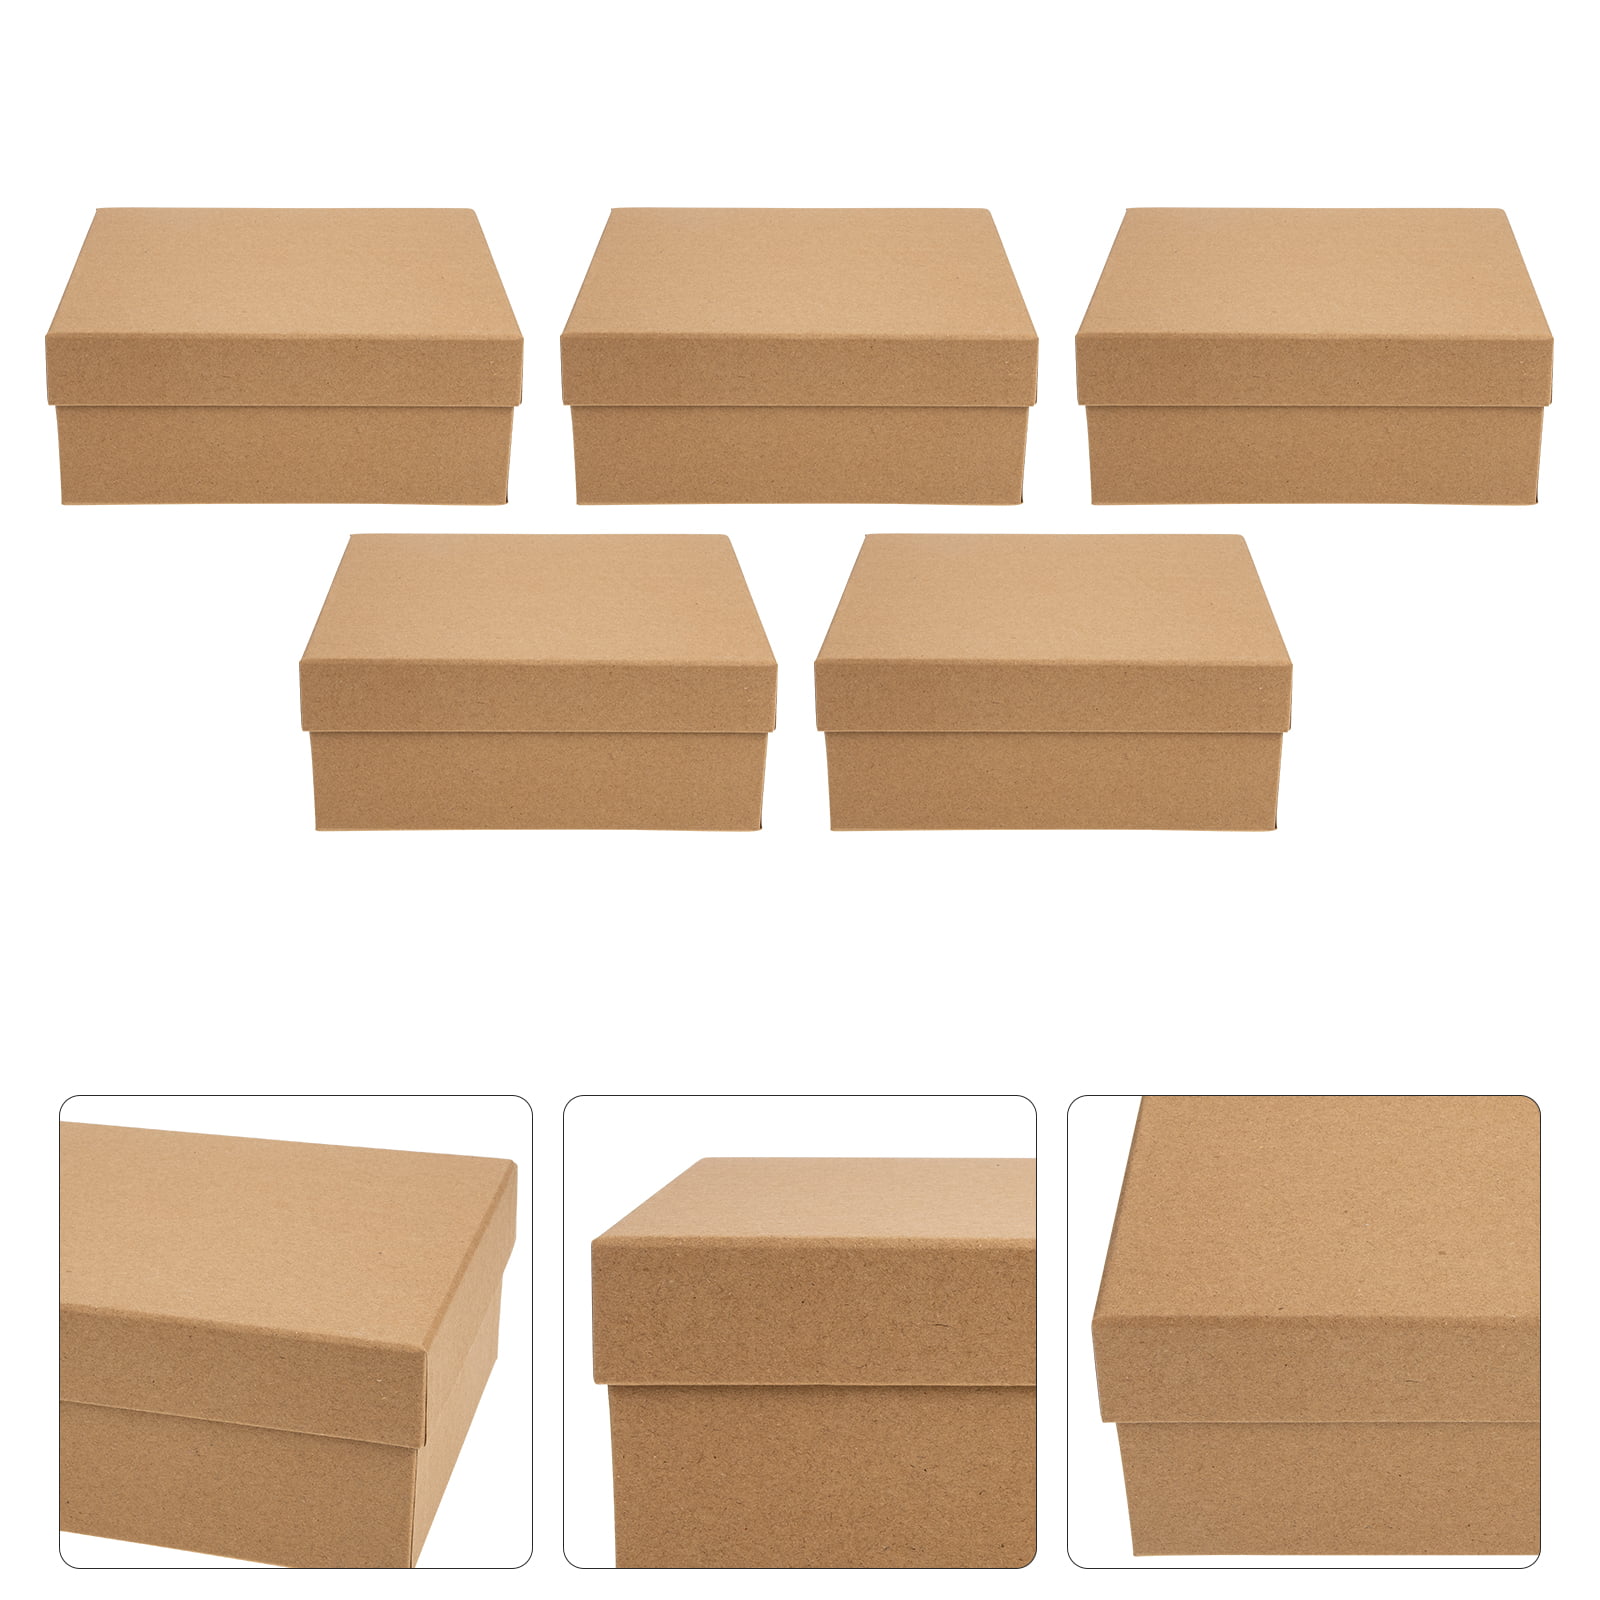 NIGNYA Small Brown Gift Boxes 2.16x2.16x0.98 inches, 100PCS Tiny Boxes for  Gifts Cardboard Mini Favor Boxes for Presents, Small Favor Box, Jewelry